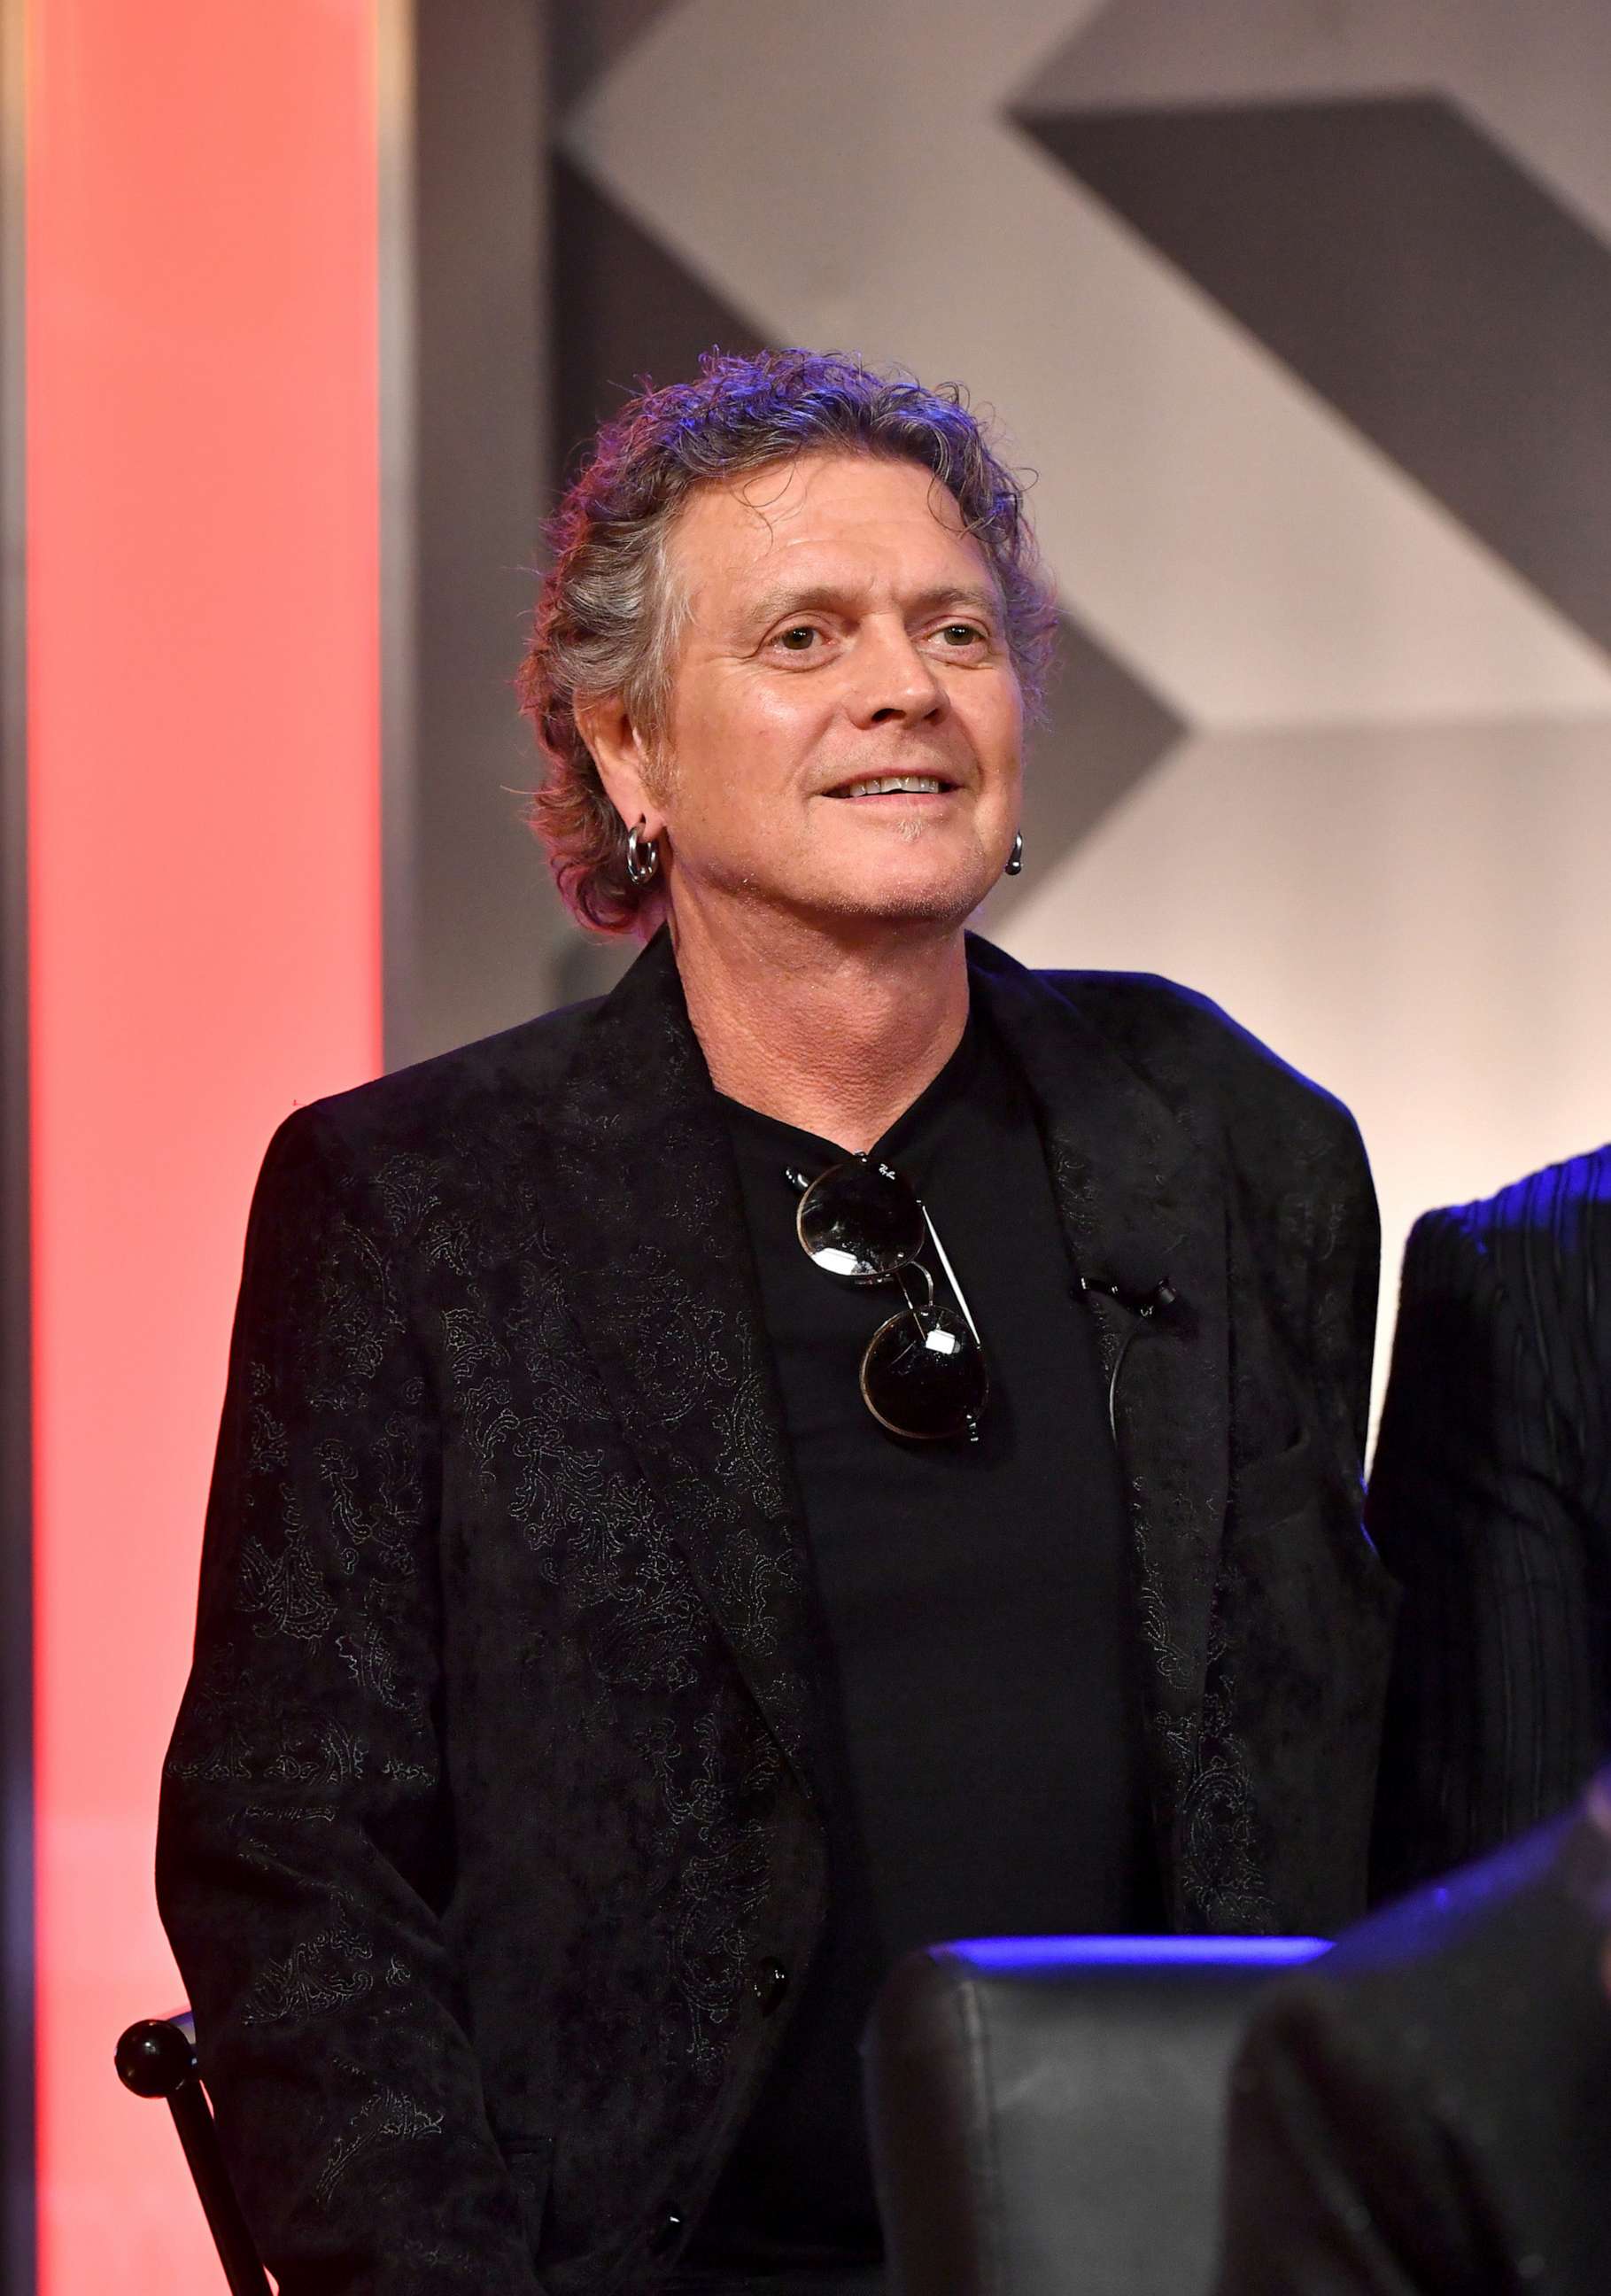 PHOTO: In this Dec. 4, 2019, file photo, Rick Allen of Def Leppard speaks during the press conference in Los Angeles.